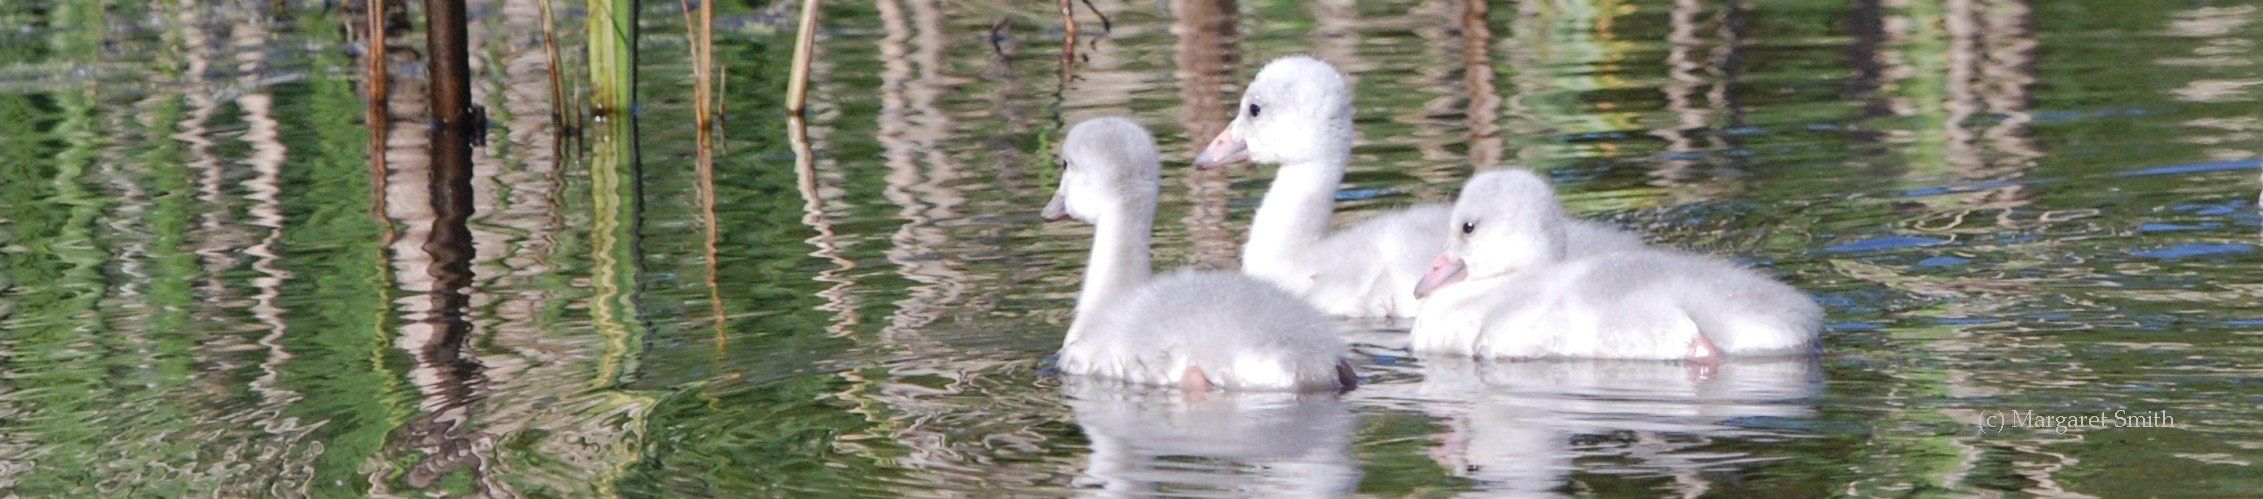 Your Adopt a Swan donation helps protect swan health and habitats